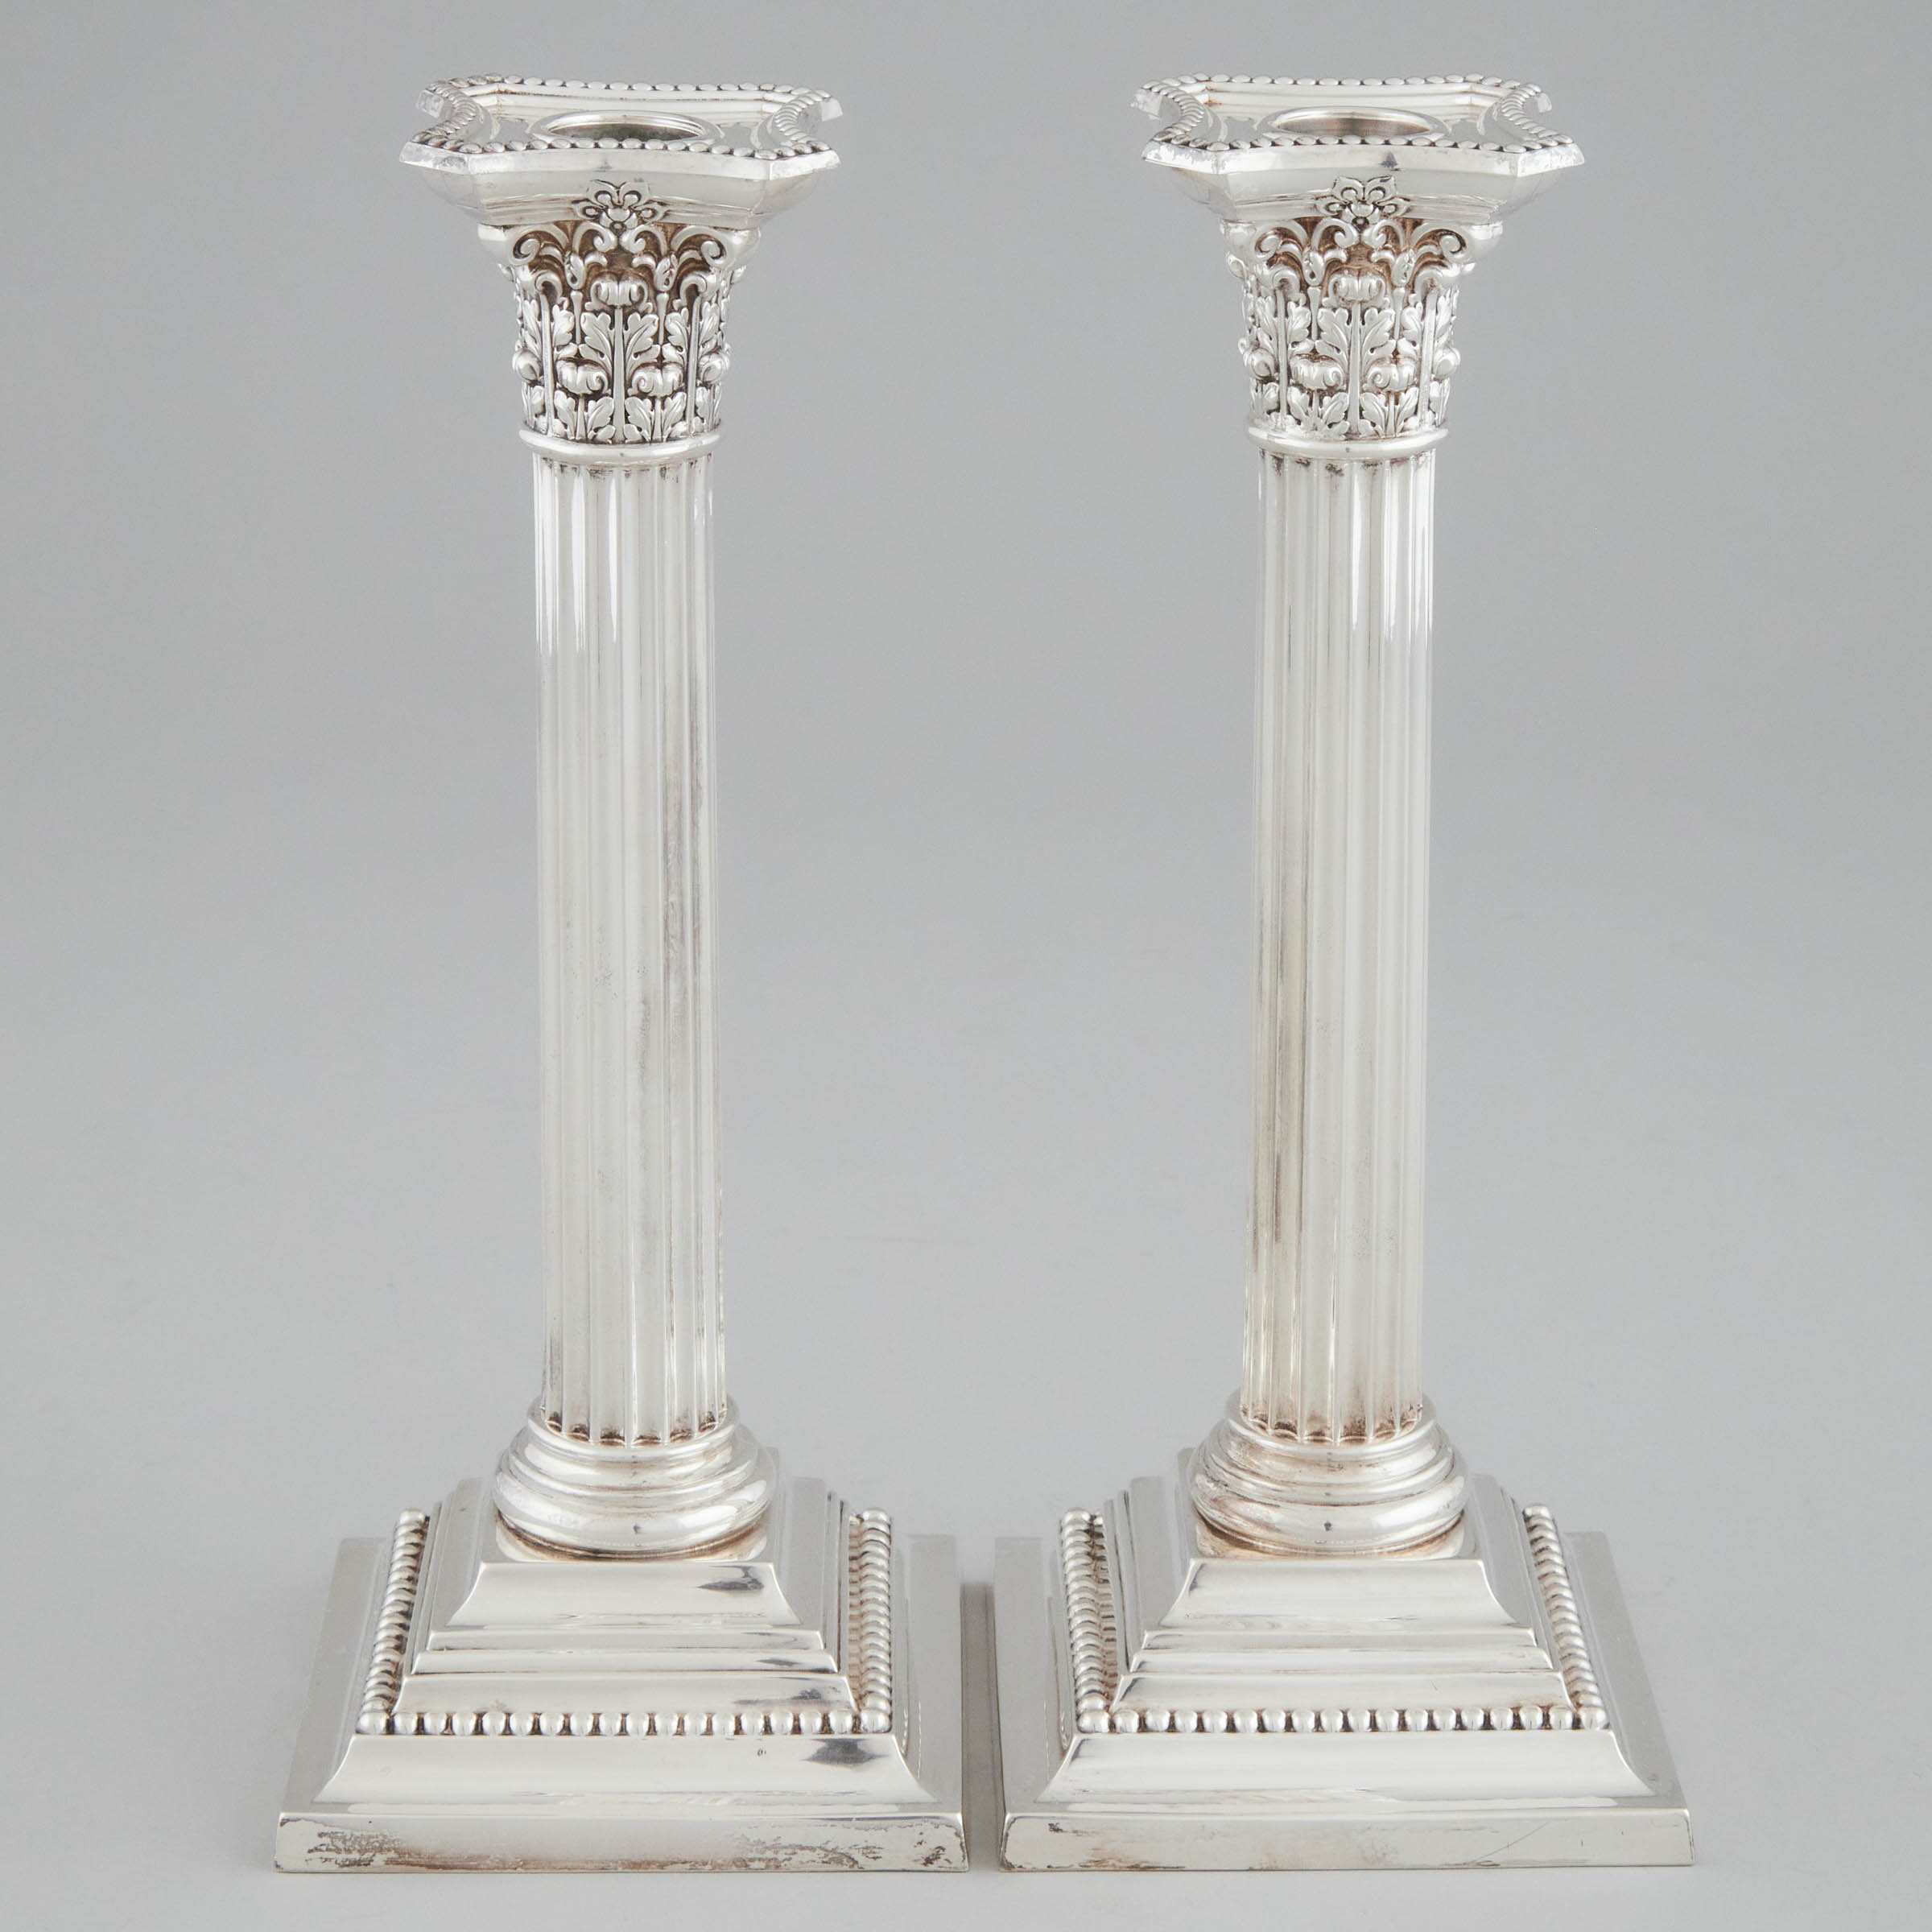 Pair of American Silver Table Candlesticks  3aabc4